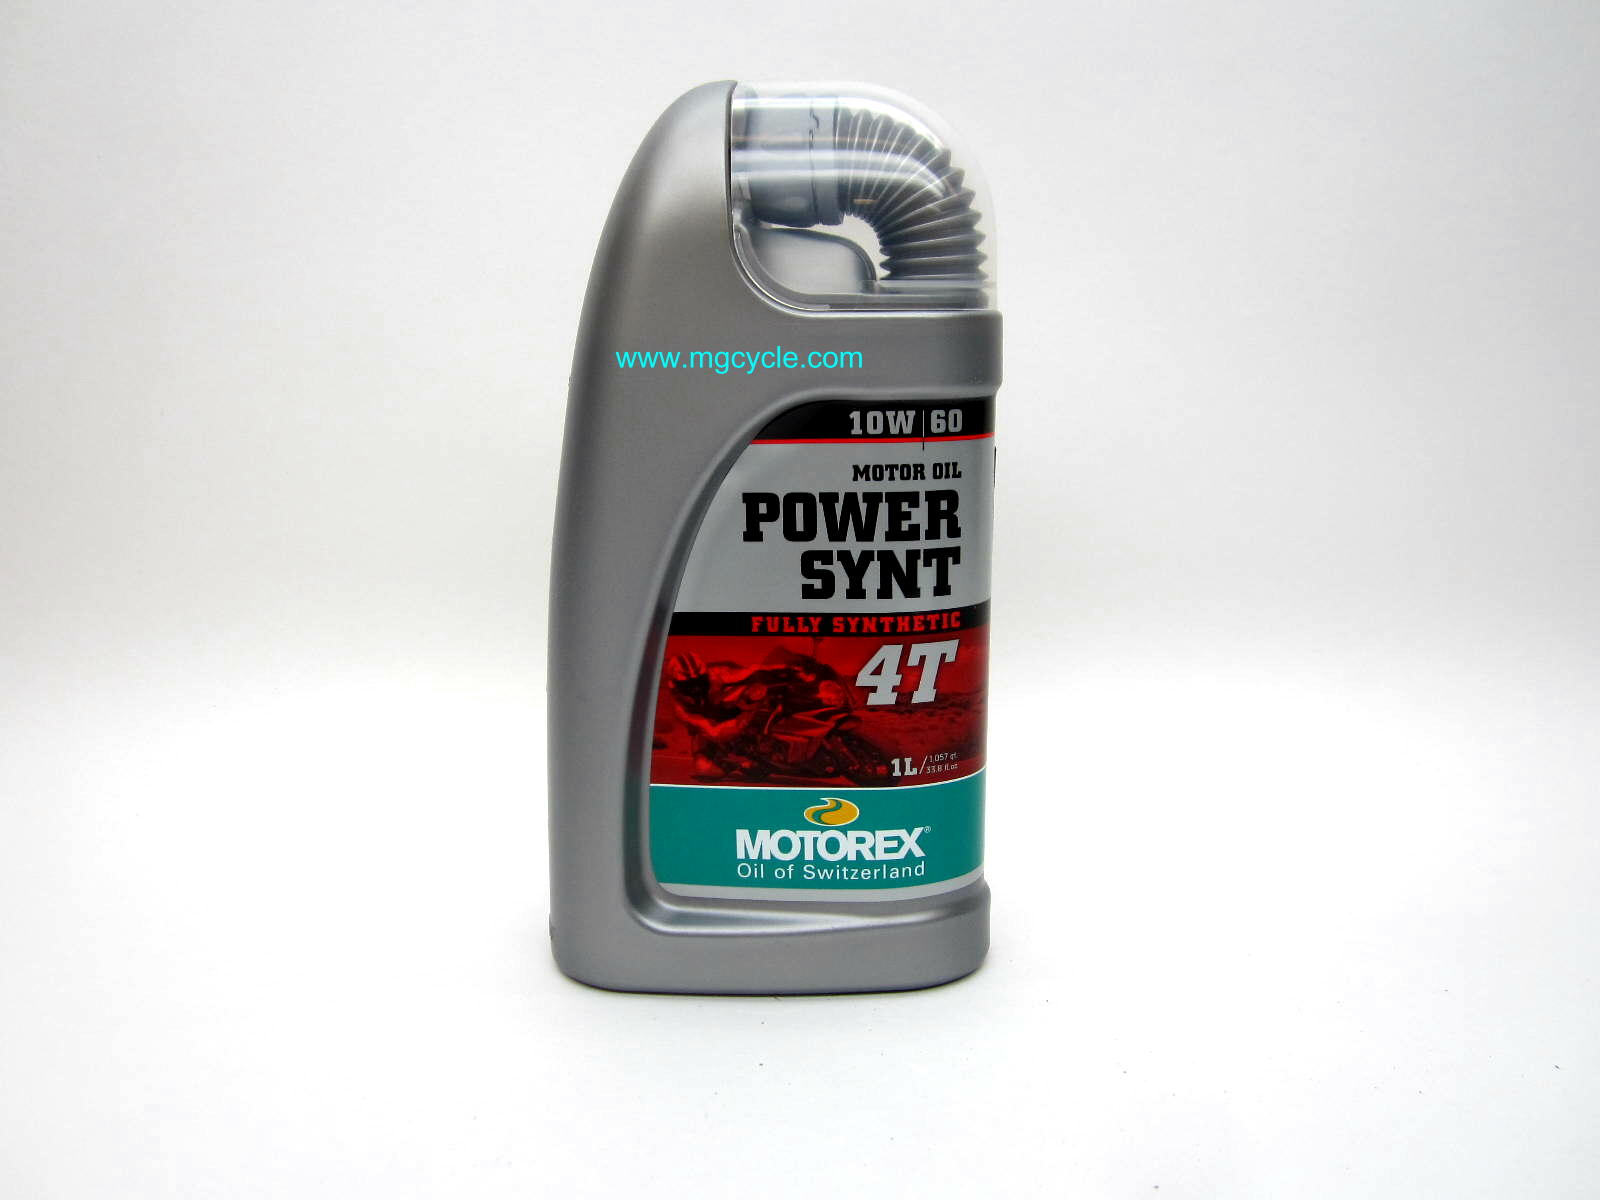 Motorex POWER SYNT 4T 10W60 synthetic motor oil, 1 liter - Click Image to Close